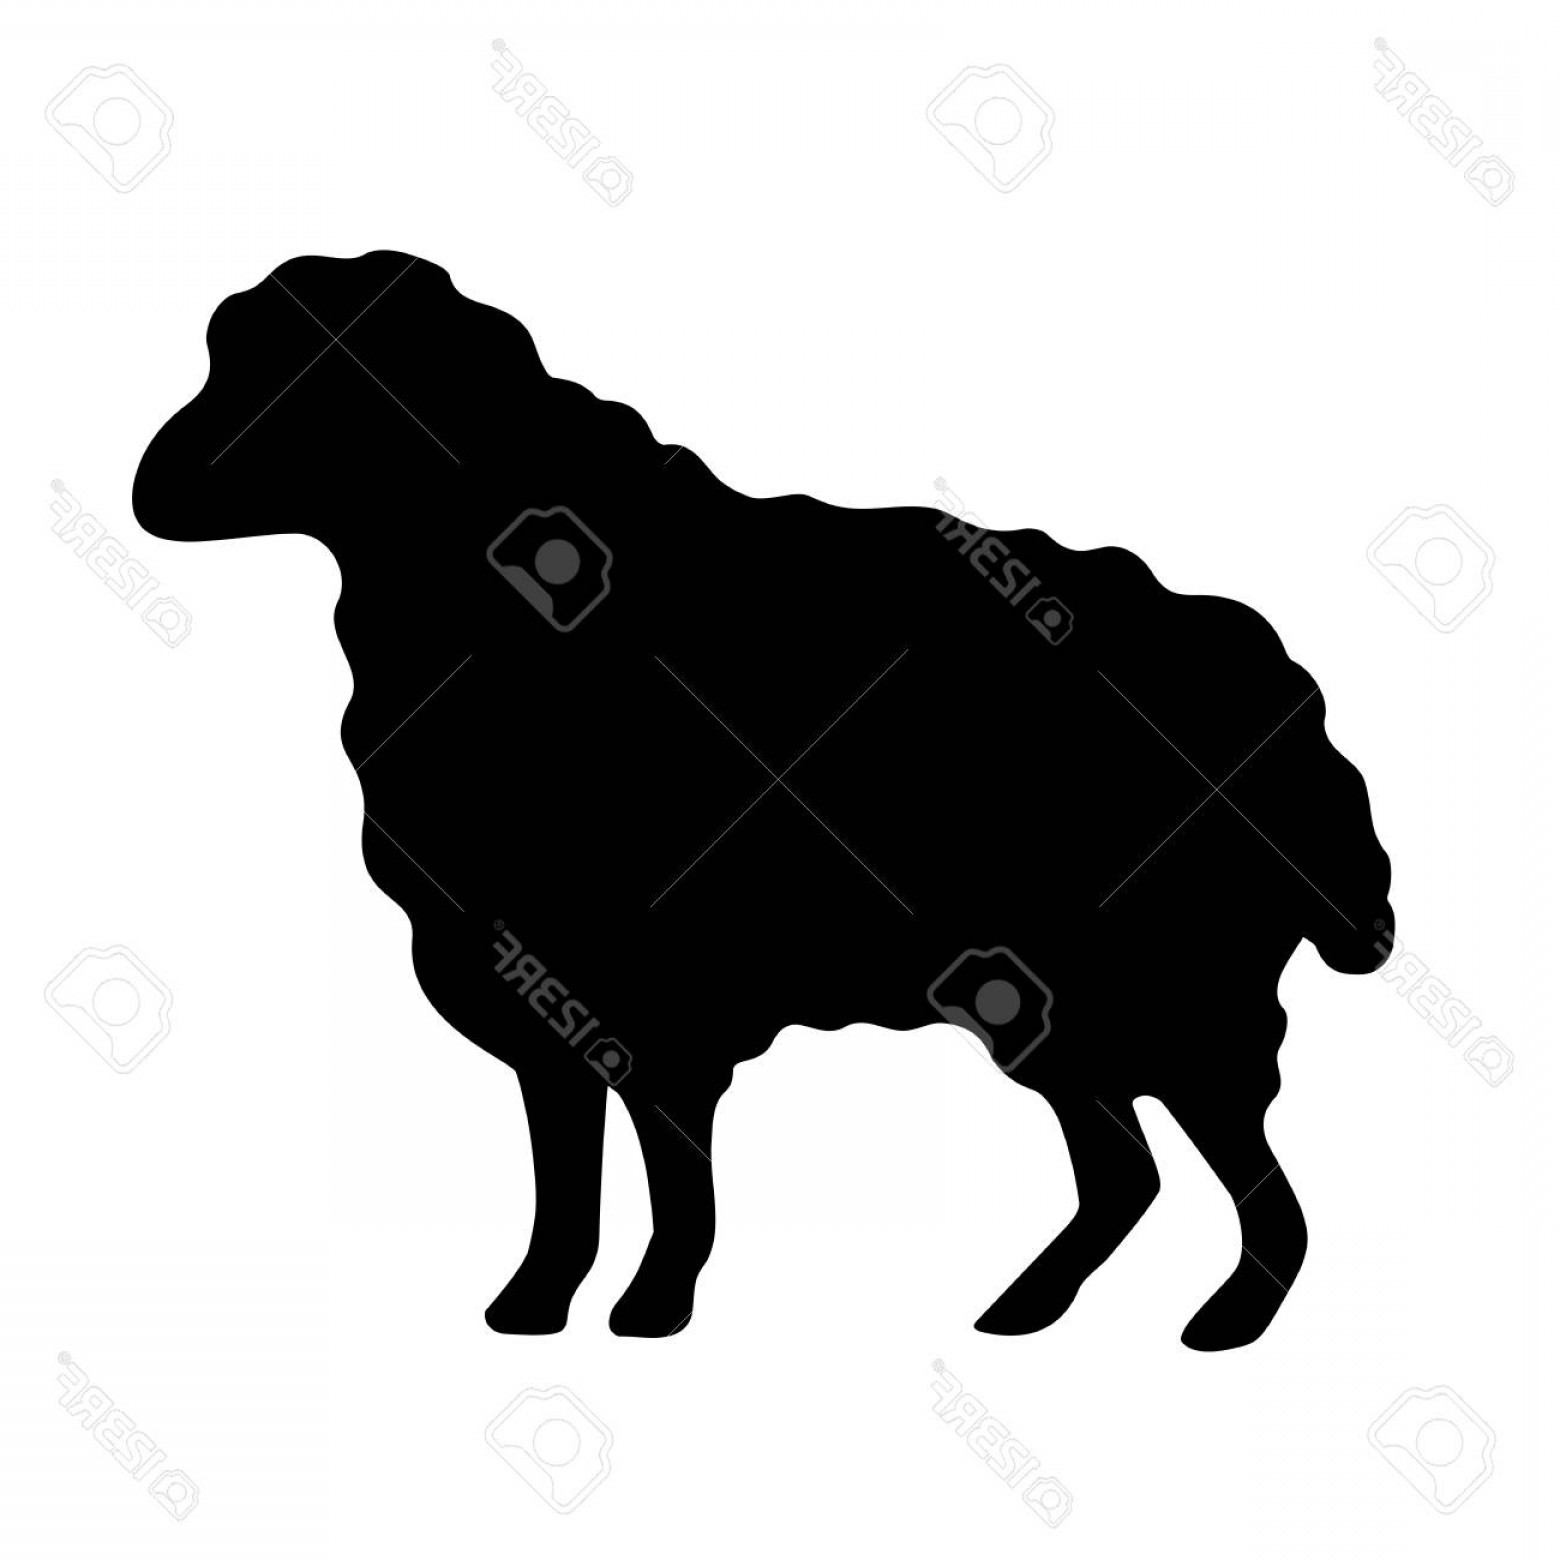 Download Lamb Silhouette Vector at Vectorified.com | Collection of ...